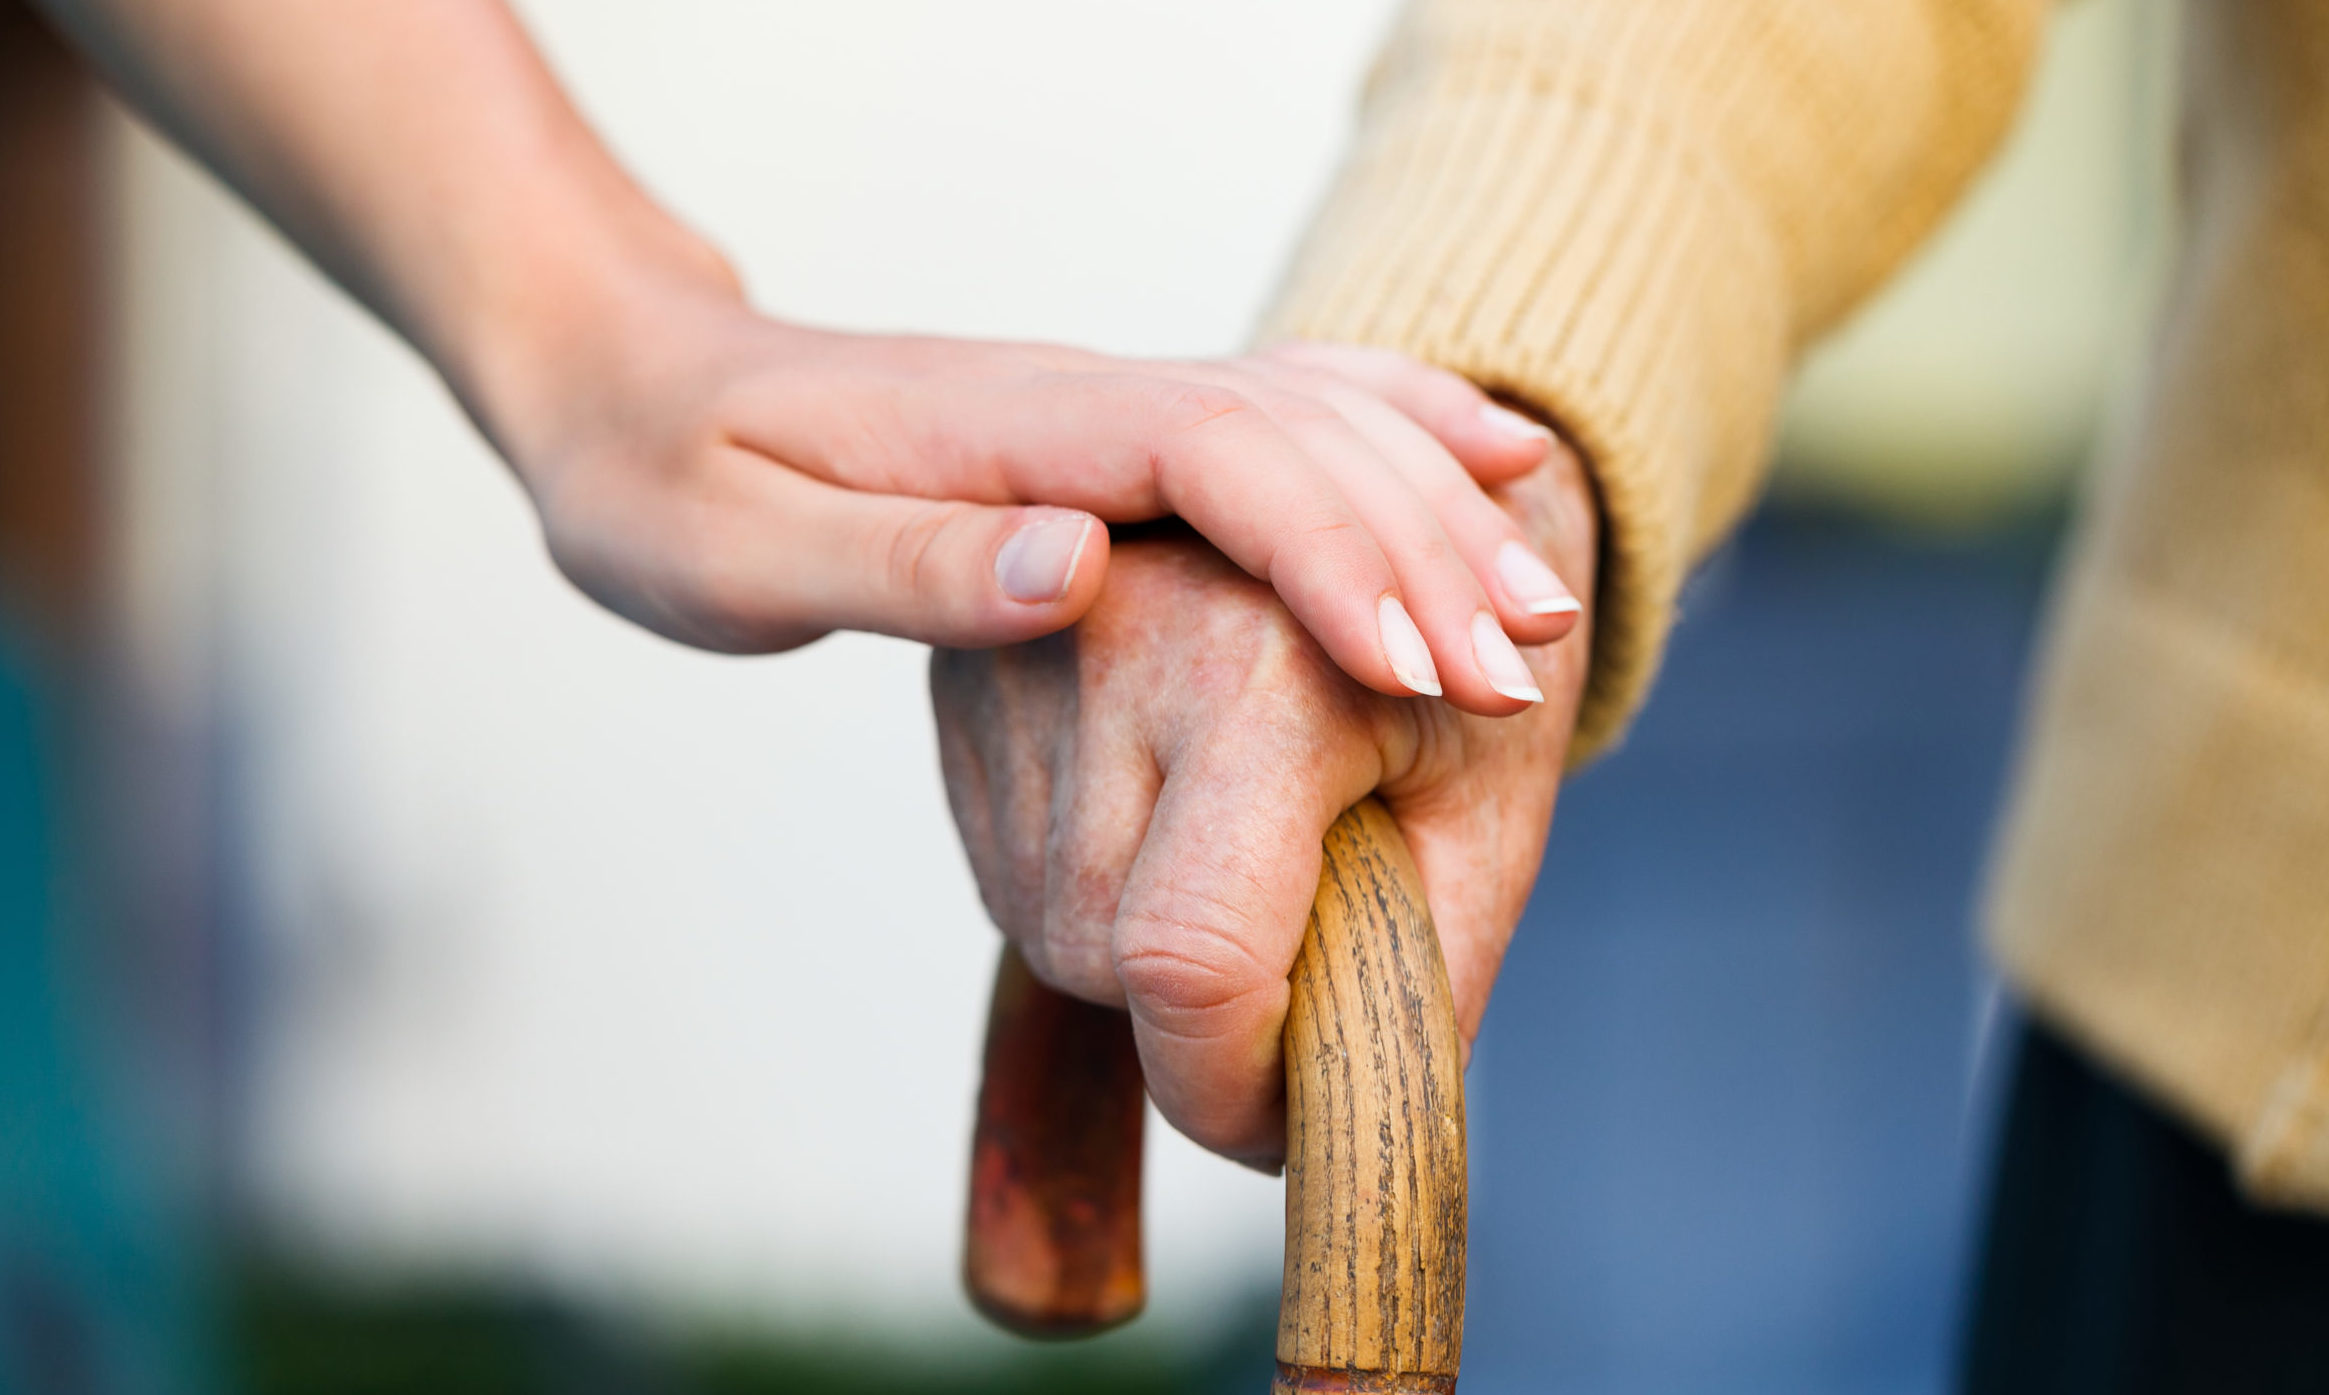 Many elderly need hospital treatment after falls in Dundee.
Photo credit: Shutterstock